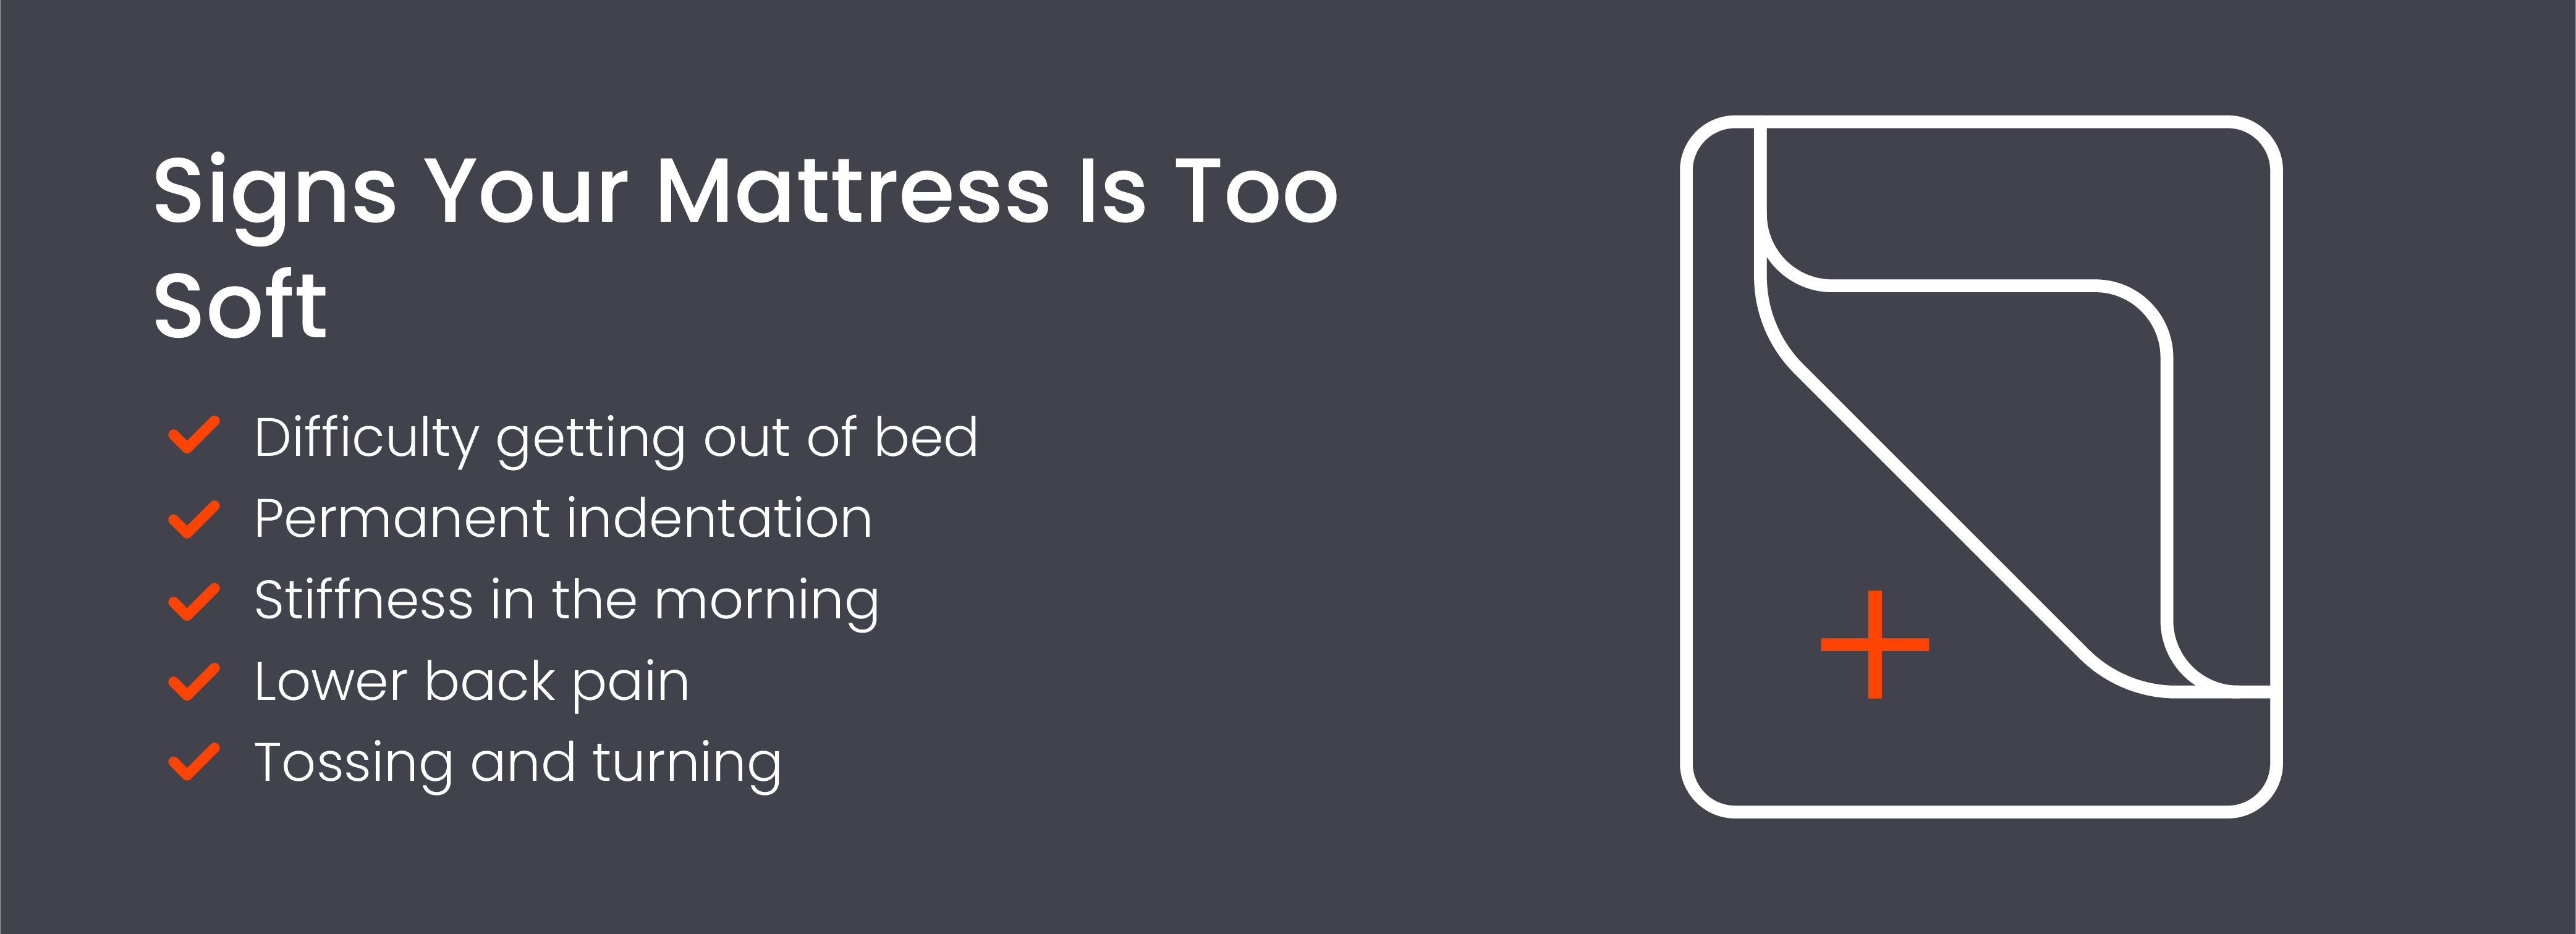 Signs your mattress is too soft